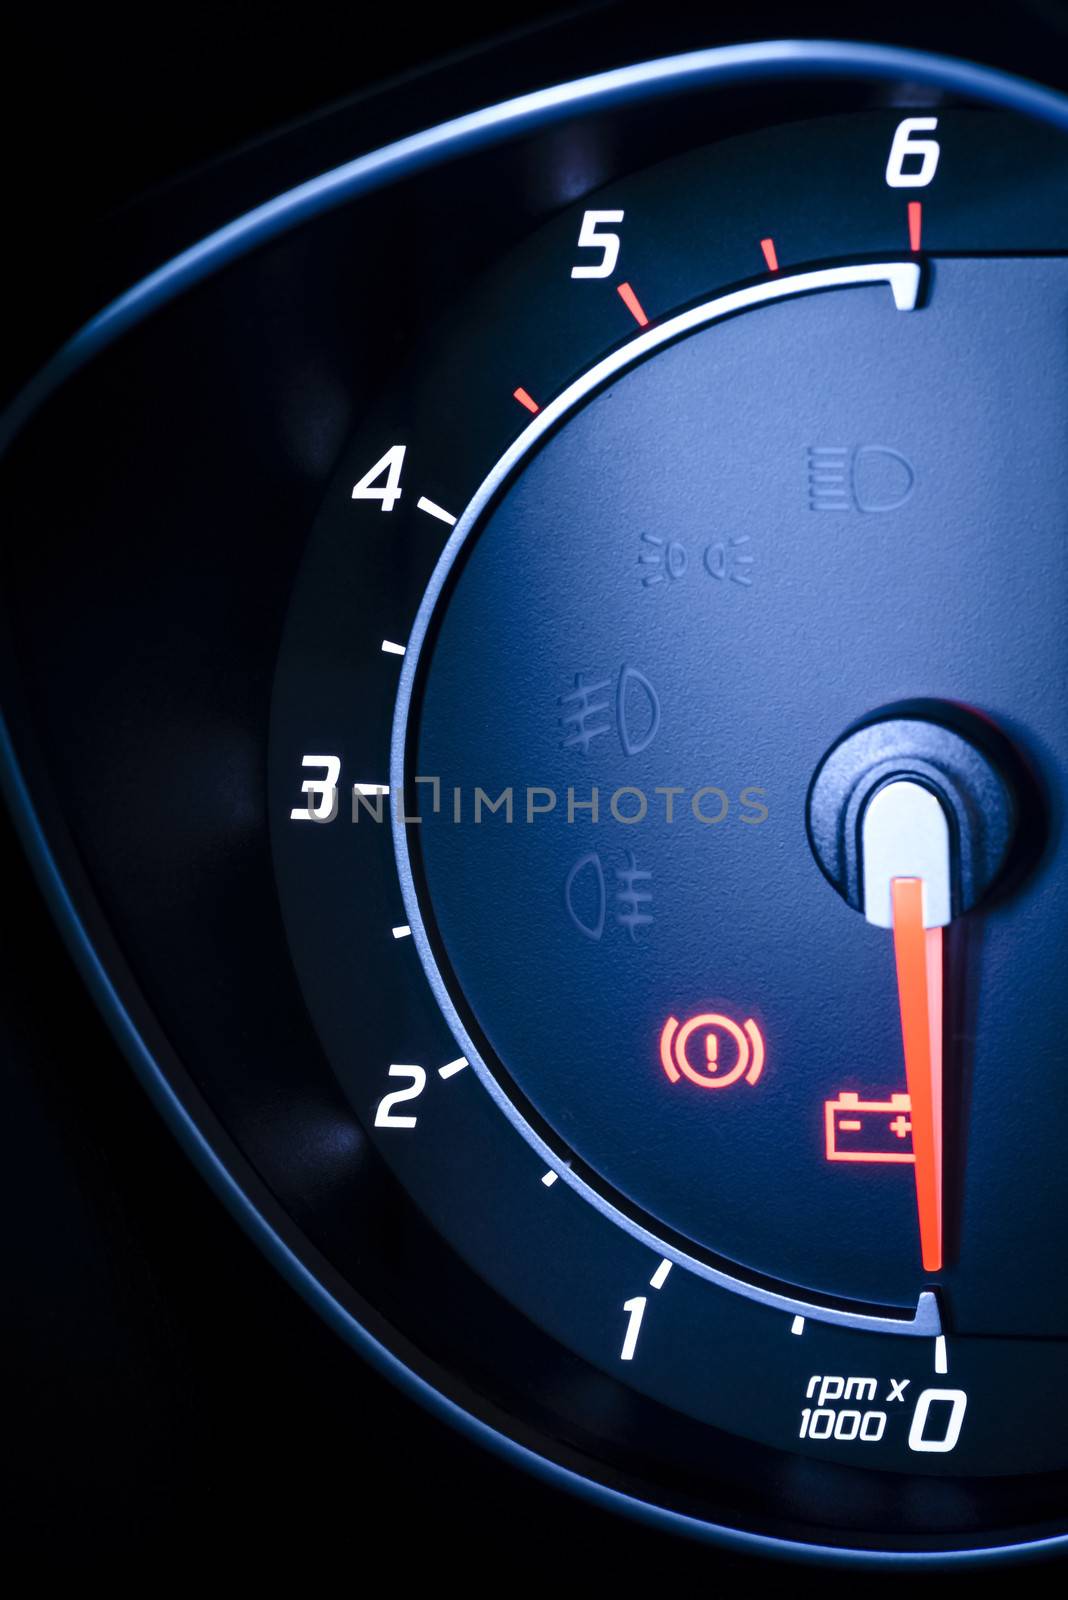 Photo presents car's, vehicle's speedometer or tachometer with visible information display - ignition warning lamp  and brake system warning lamp, visible symbols of instrument cluster ( ten check warning light), with warning lamps illuminated.